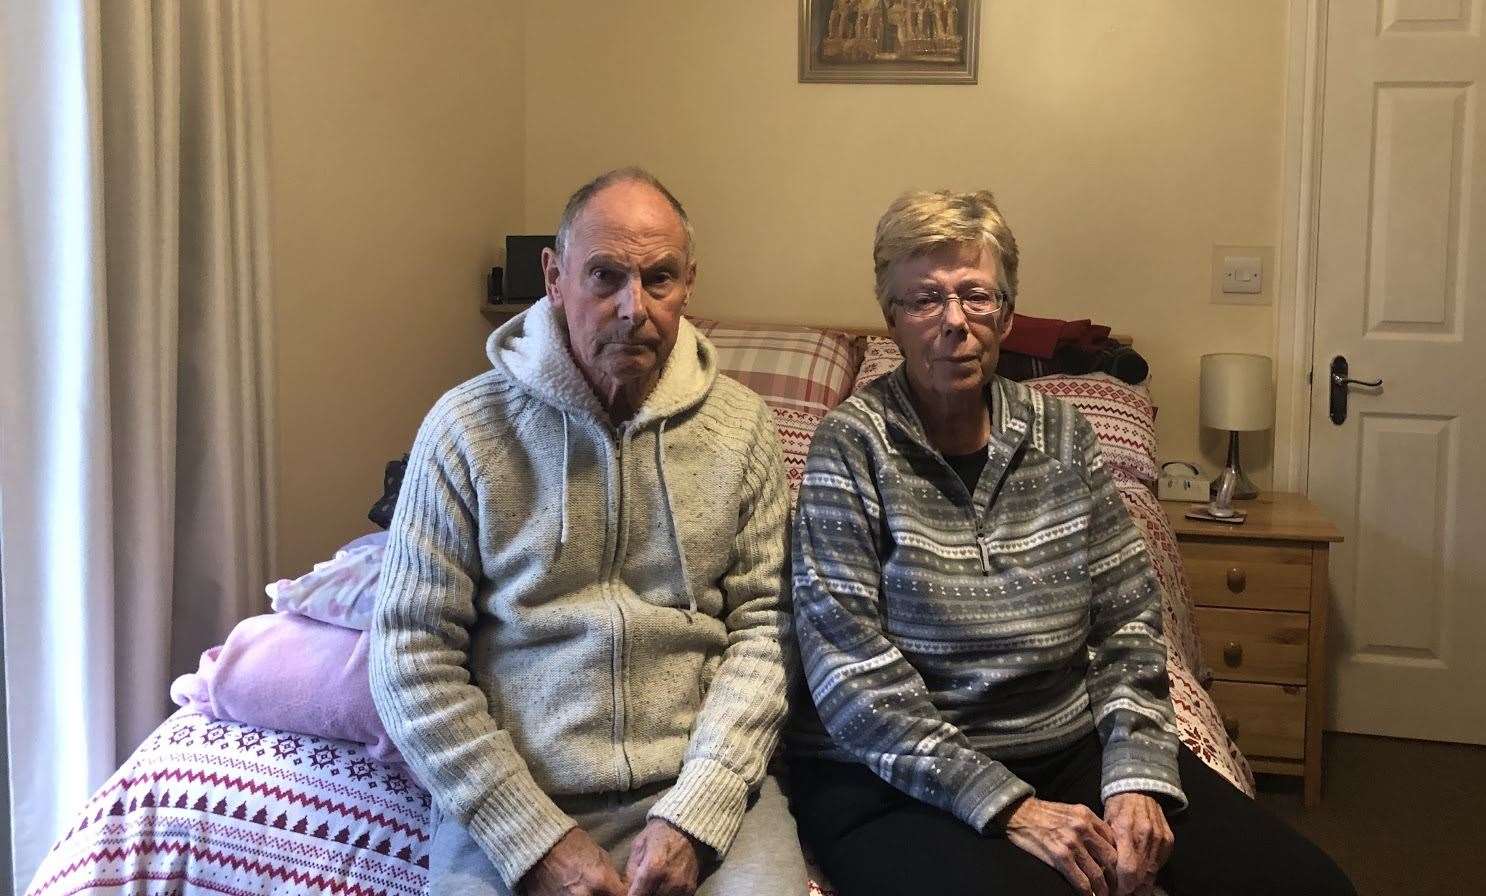 The couple have been married for 50 years and live in West Dumpton Lane, Ramsgate